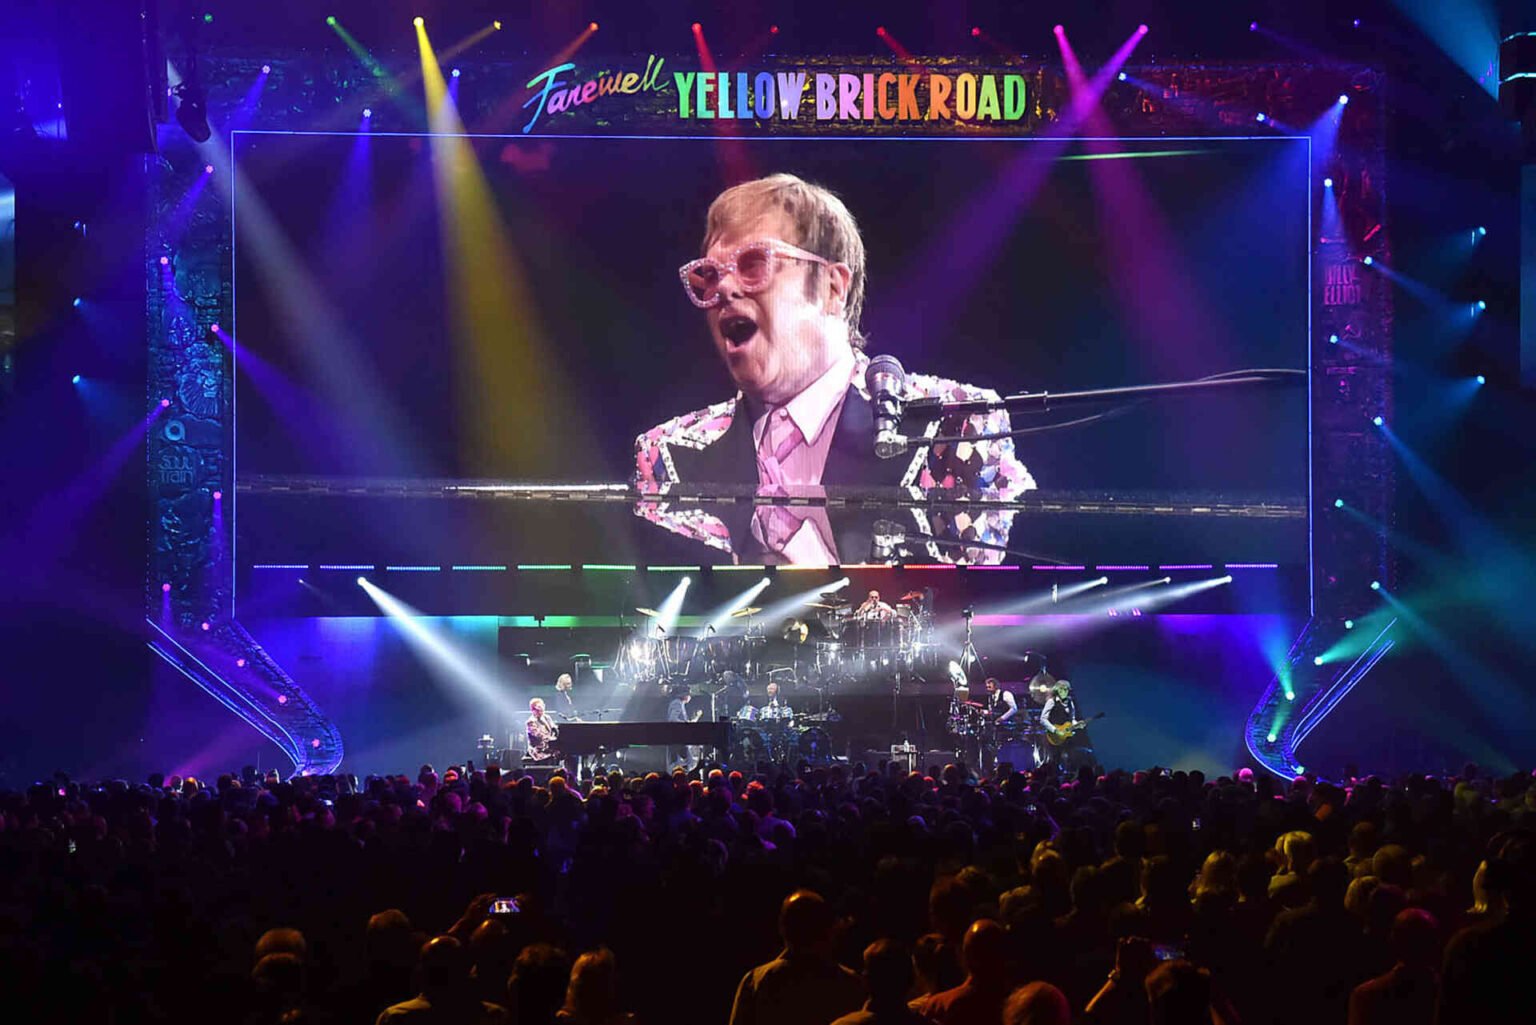 Elton John is officially saying his goodbyes to the yellow brick road . . . . Let’s take a look at all the tour details we know so far.